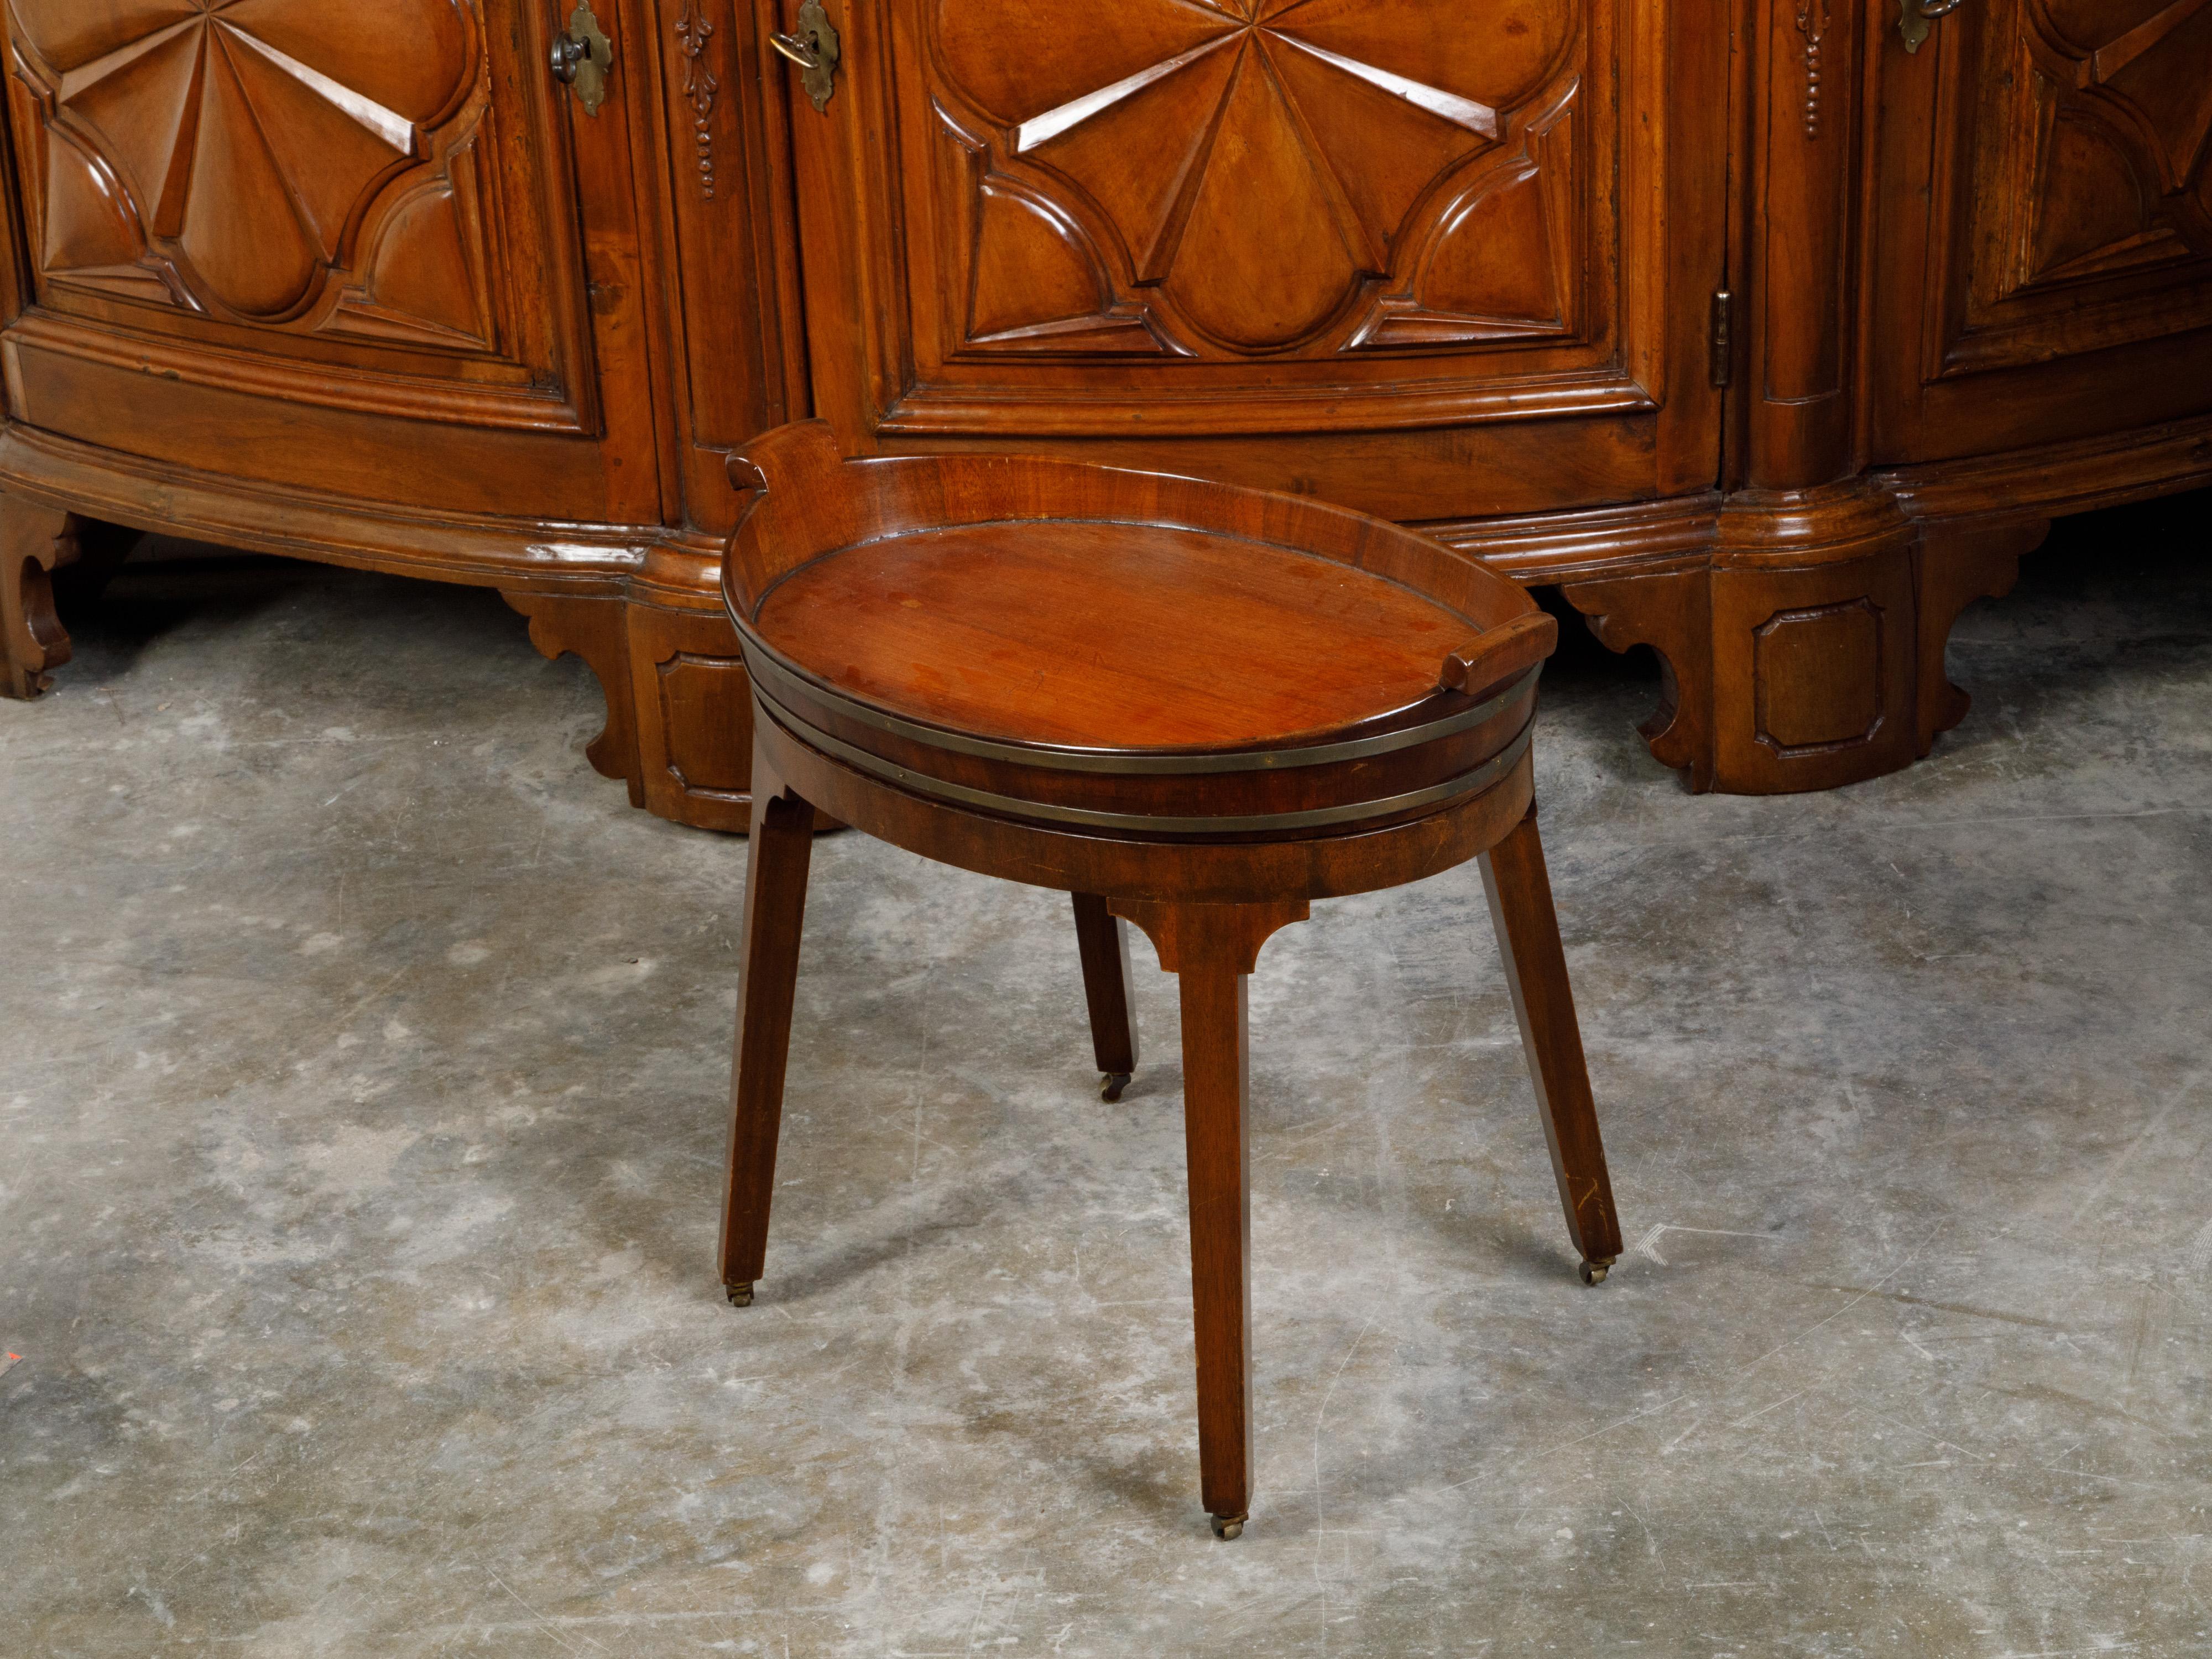 English 19th Century Oval Mahogany Tray Top Table with Brass Accents and Casters For Sale 3